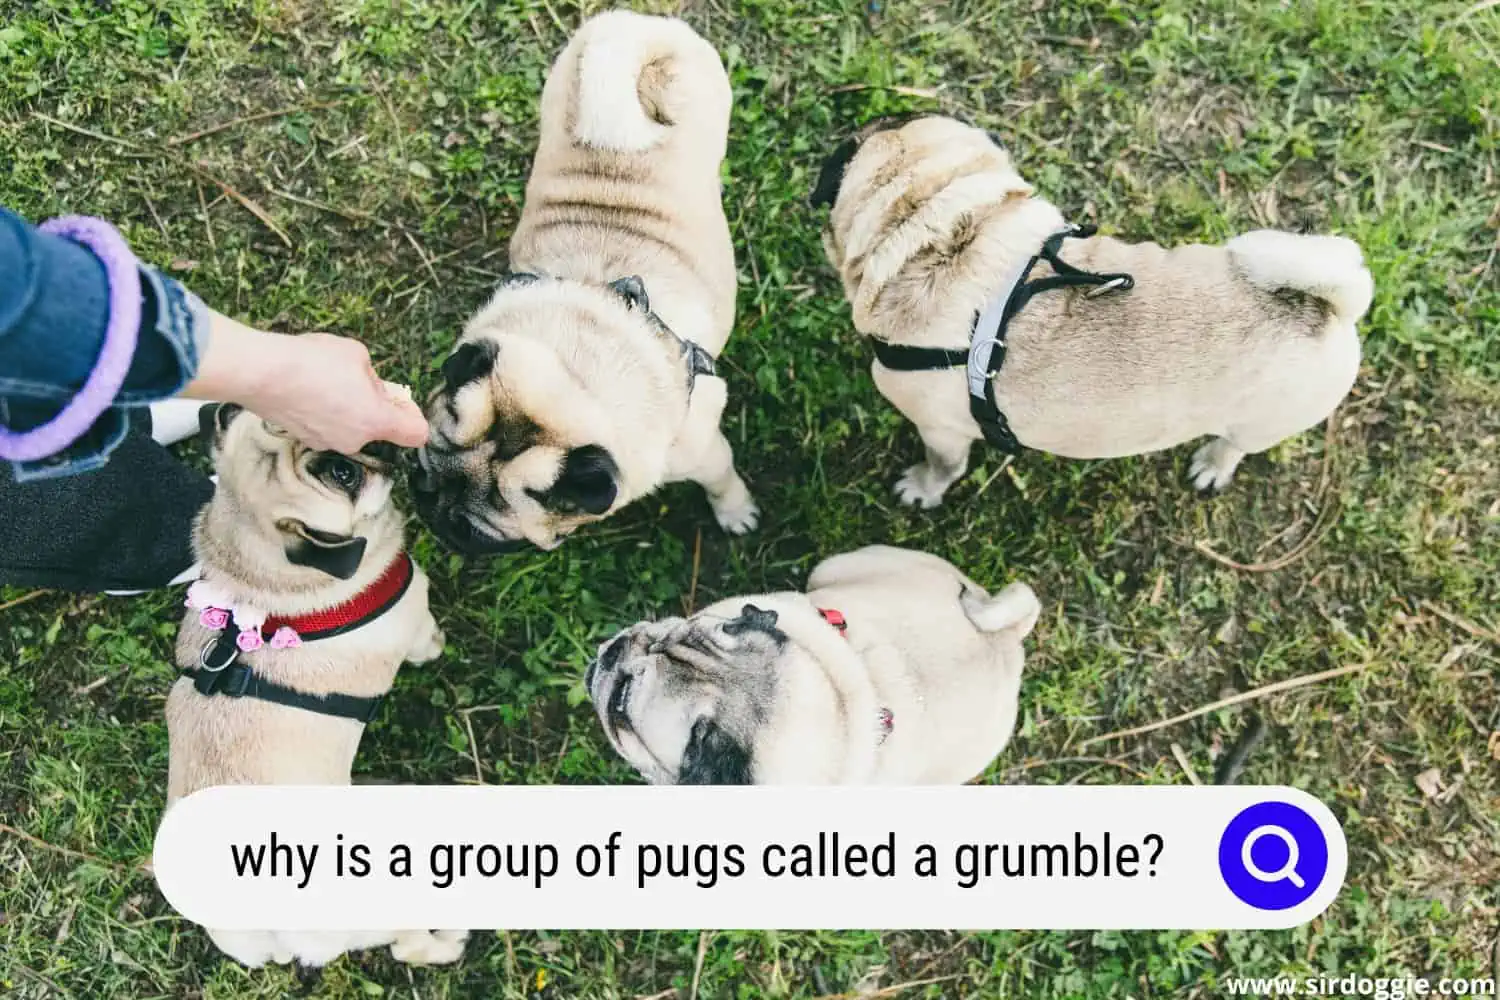 why is a group of pugs called a grumble